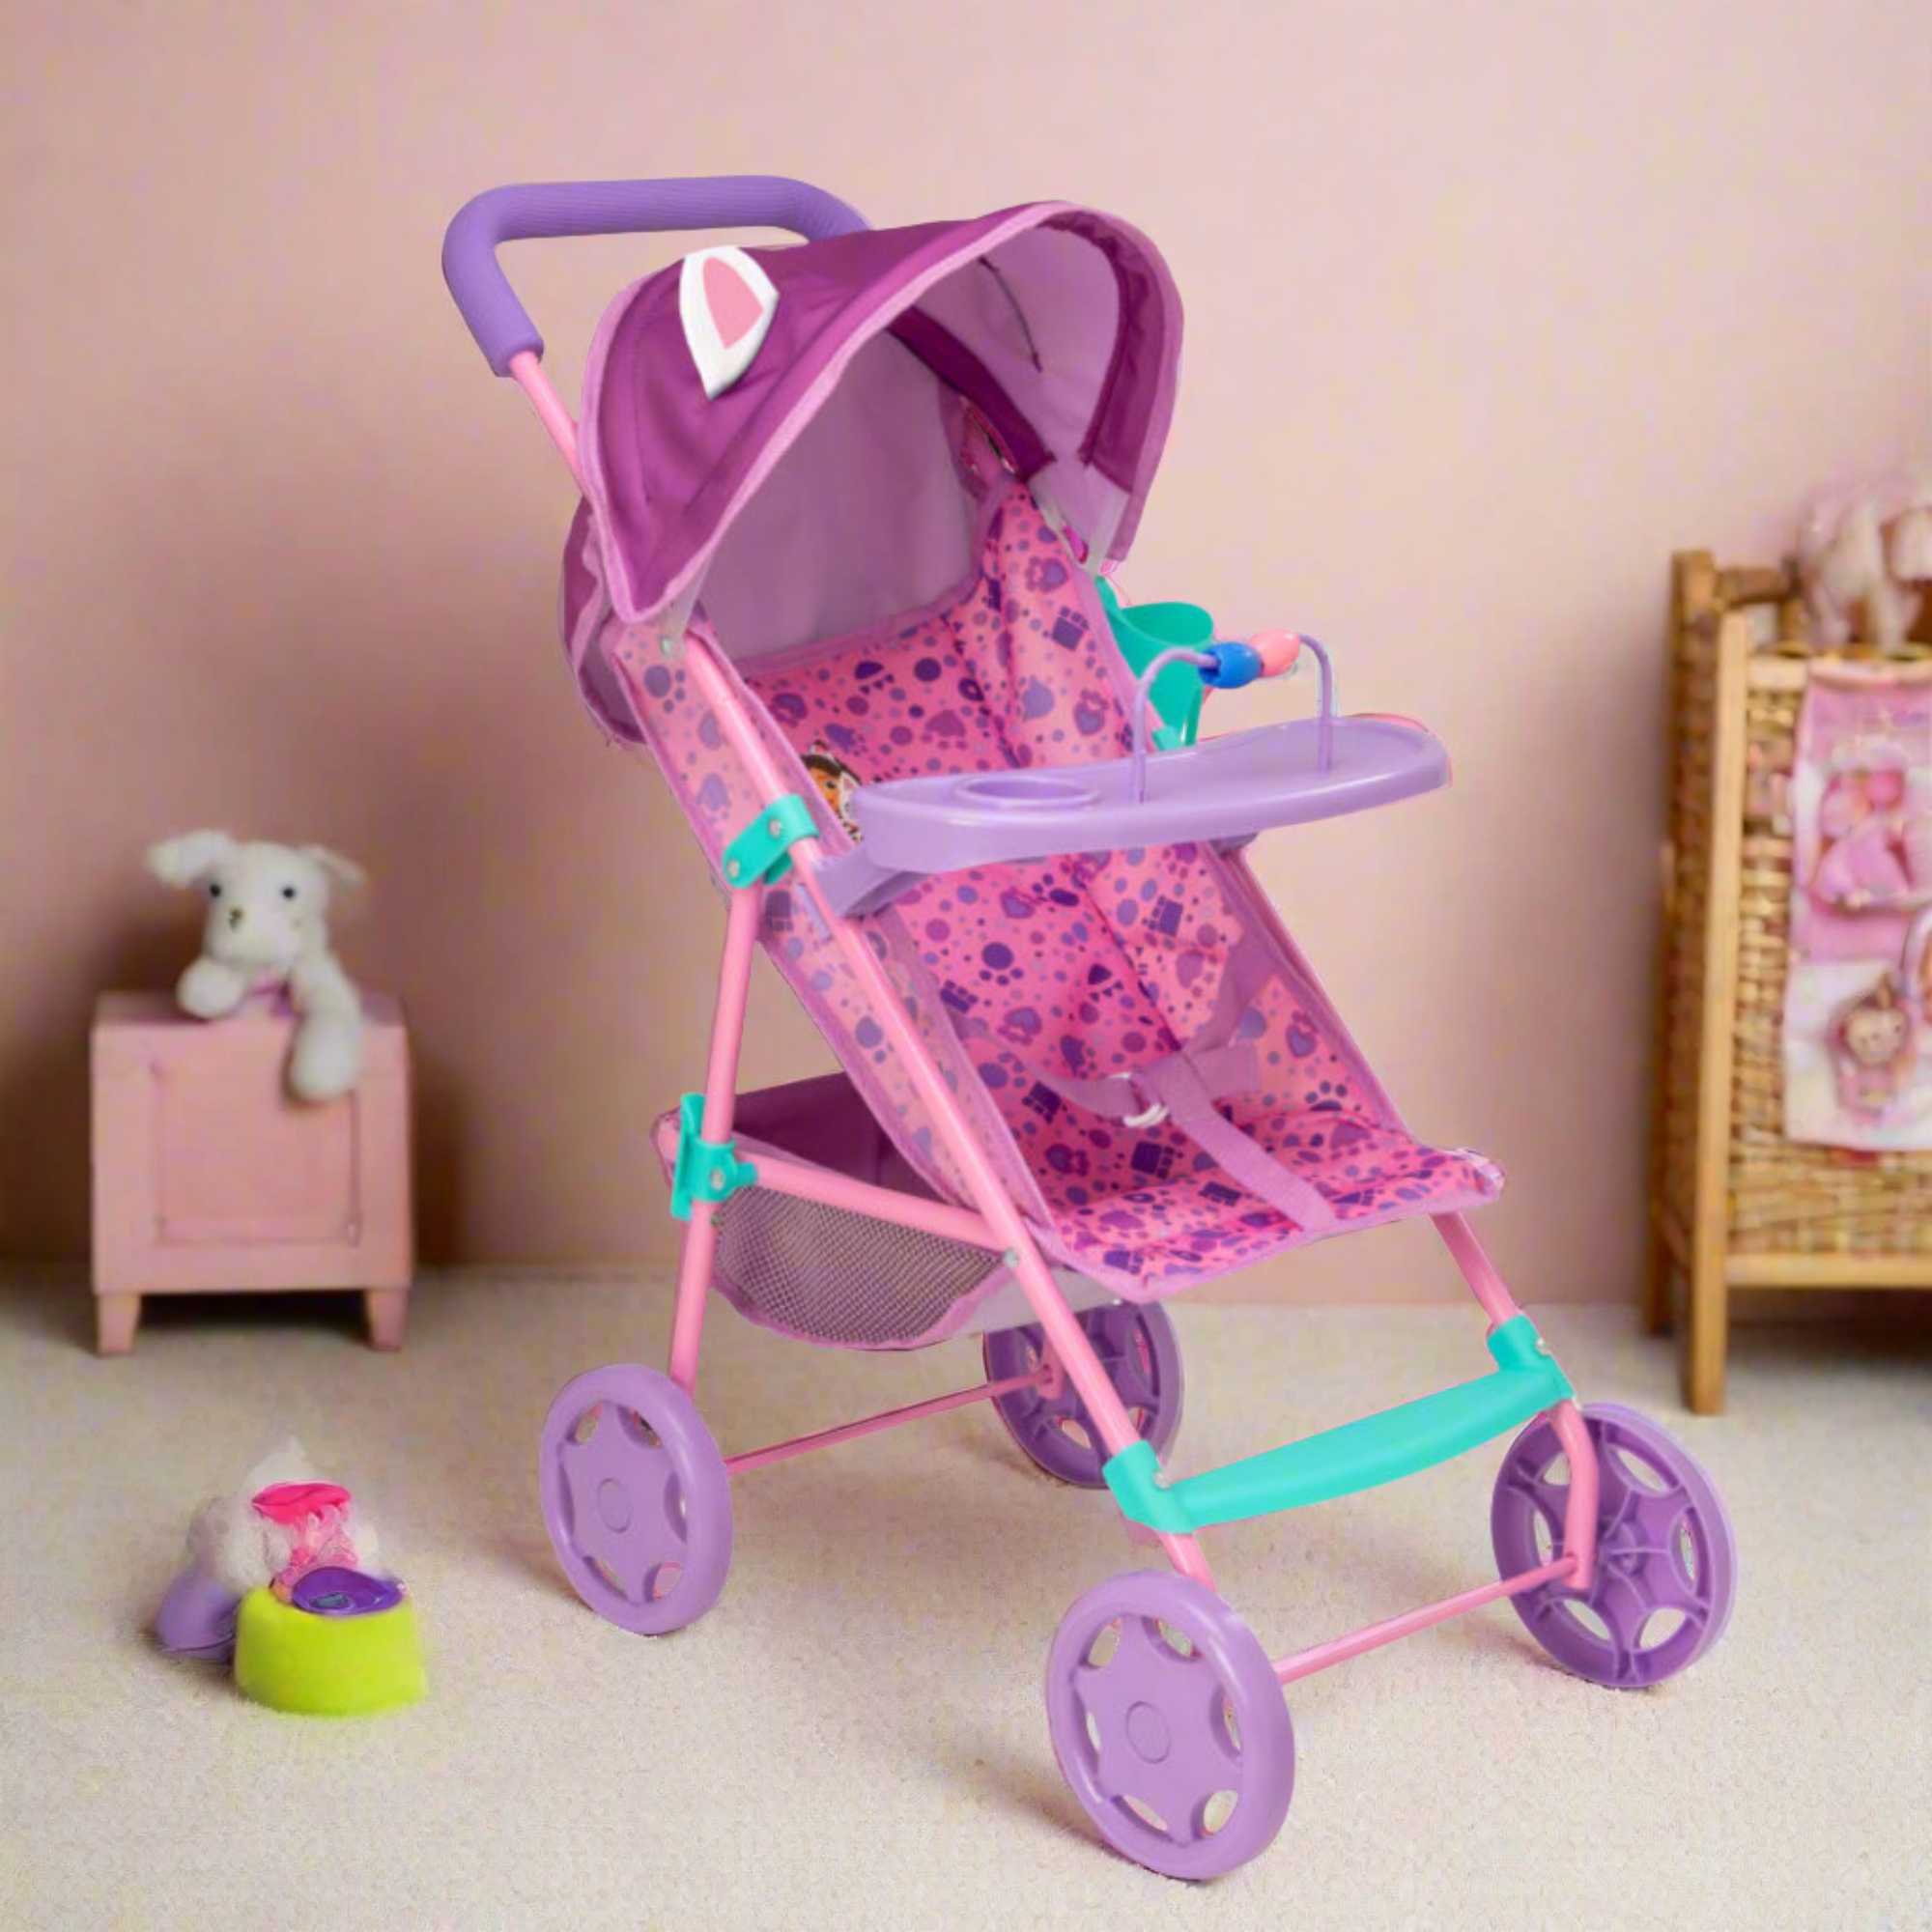 Bright and fun toy pushchair inspired by Gabby's Dollhouse, ideal for kids to push their favourite dolls and toys. Features a durable frame, smooth-rolling wheels, and colourful designs with beloved characters from the series.